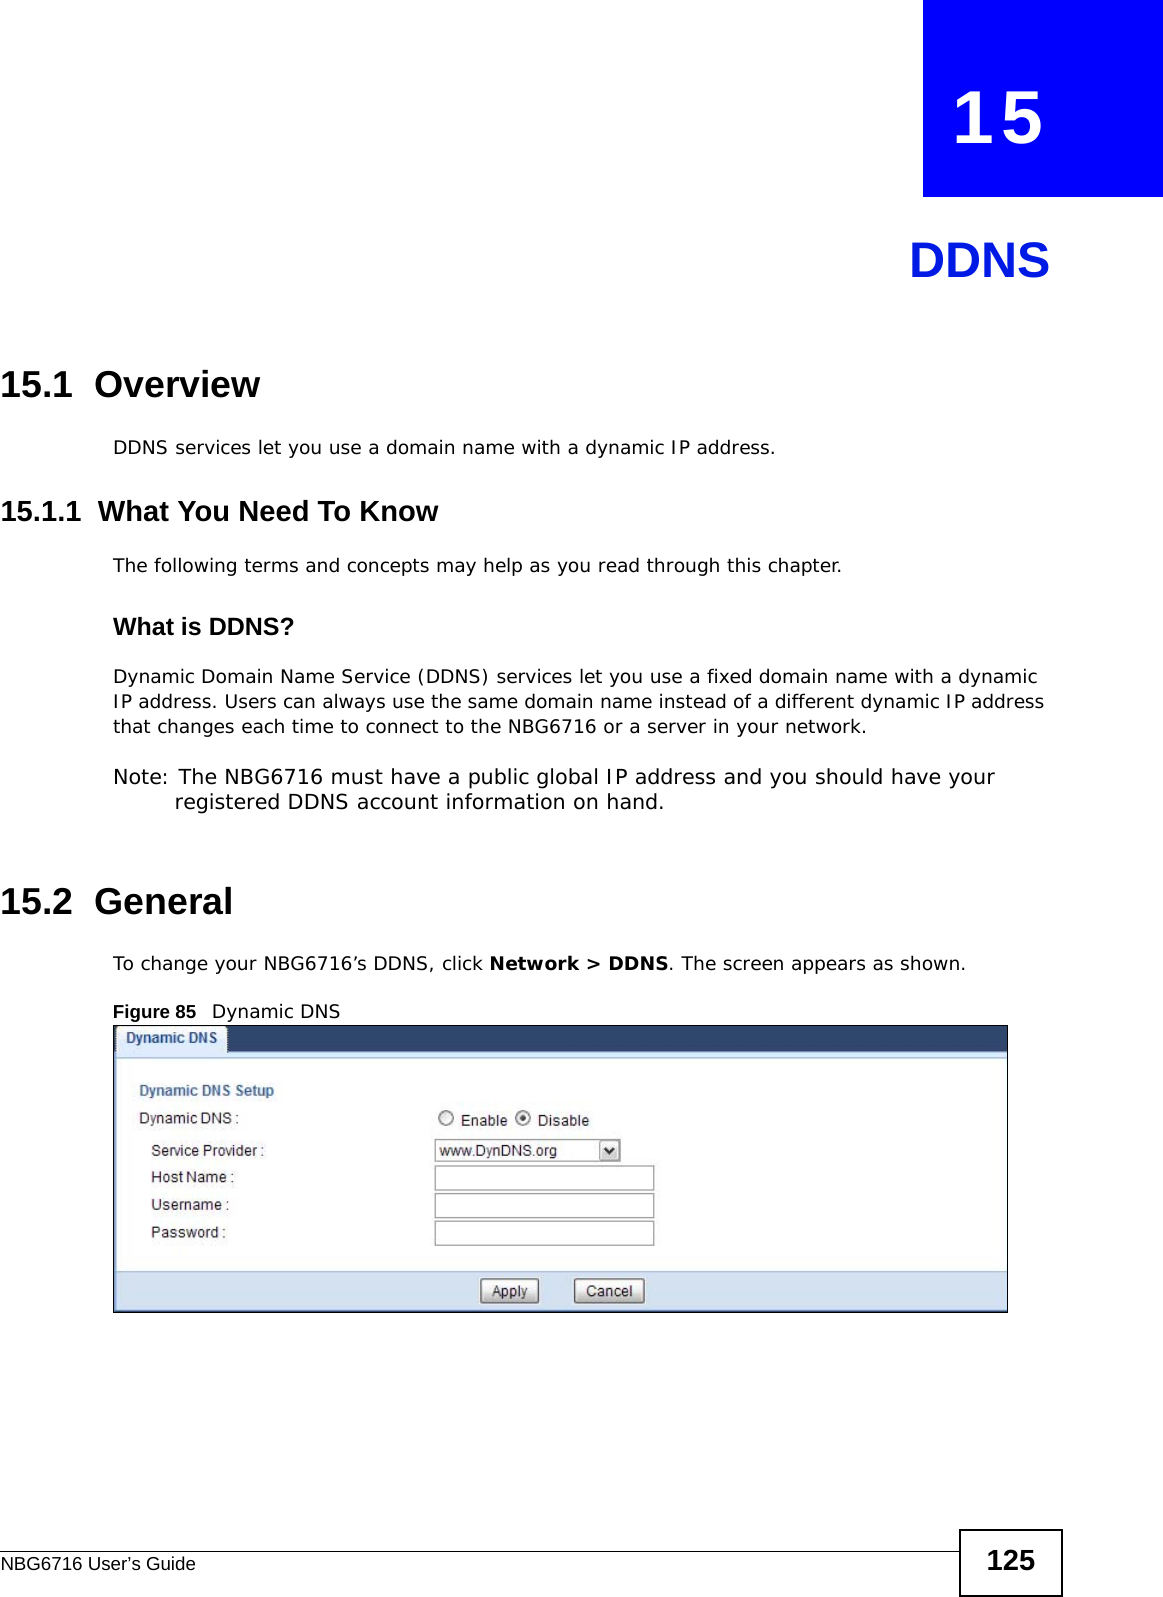 NBG6716 User’s Guide 125CHAPTER   15DDNS15.1  Overview DDNS services let you use a domain name with a dynamic IP address.15.1.1  What You Need To KnowThe following terms and concepts may help as you read through this chapter.What is DDNS?Dynamic Domain Name Service (DDNS) services let you use a fixed domain name with a dynamic IP address. Users can always use the same domain name instead of a different dynamic IP address that changes each time to connect to the NBG6716 or a server in your network.Note: The NBG6716 must have a public global IP address and you should have your registered DDNS account information on hand.15.2  General   To change your NBG6716’s DDNS, click Network &gt; DDNS. The screen appears as shown.Figure 85   Dynamic DNS